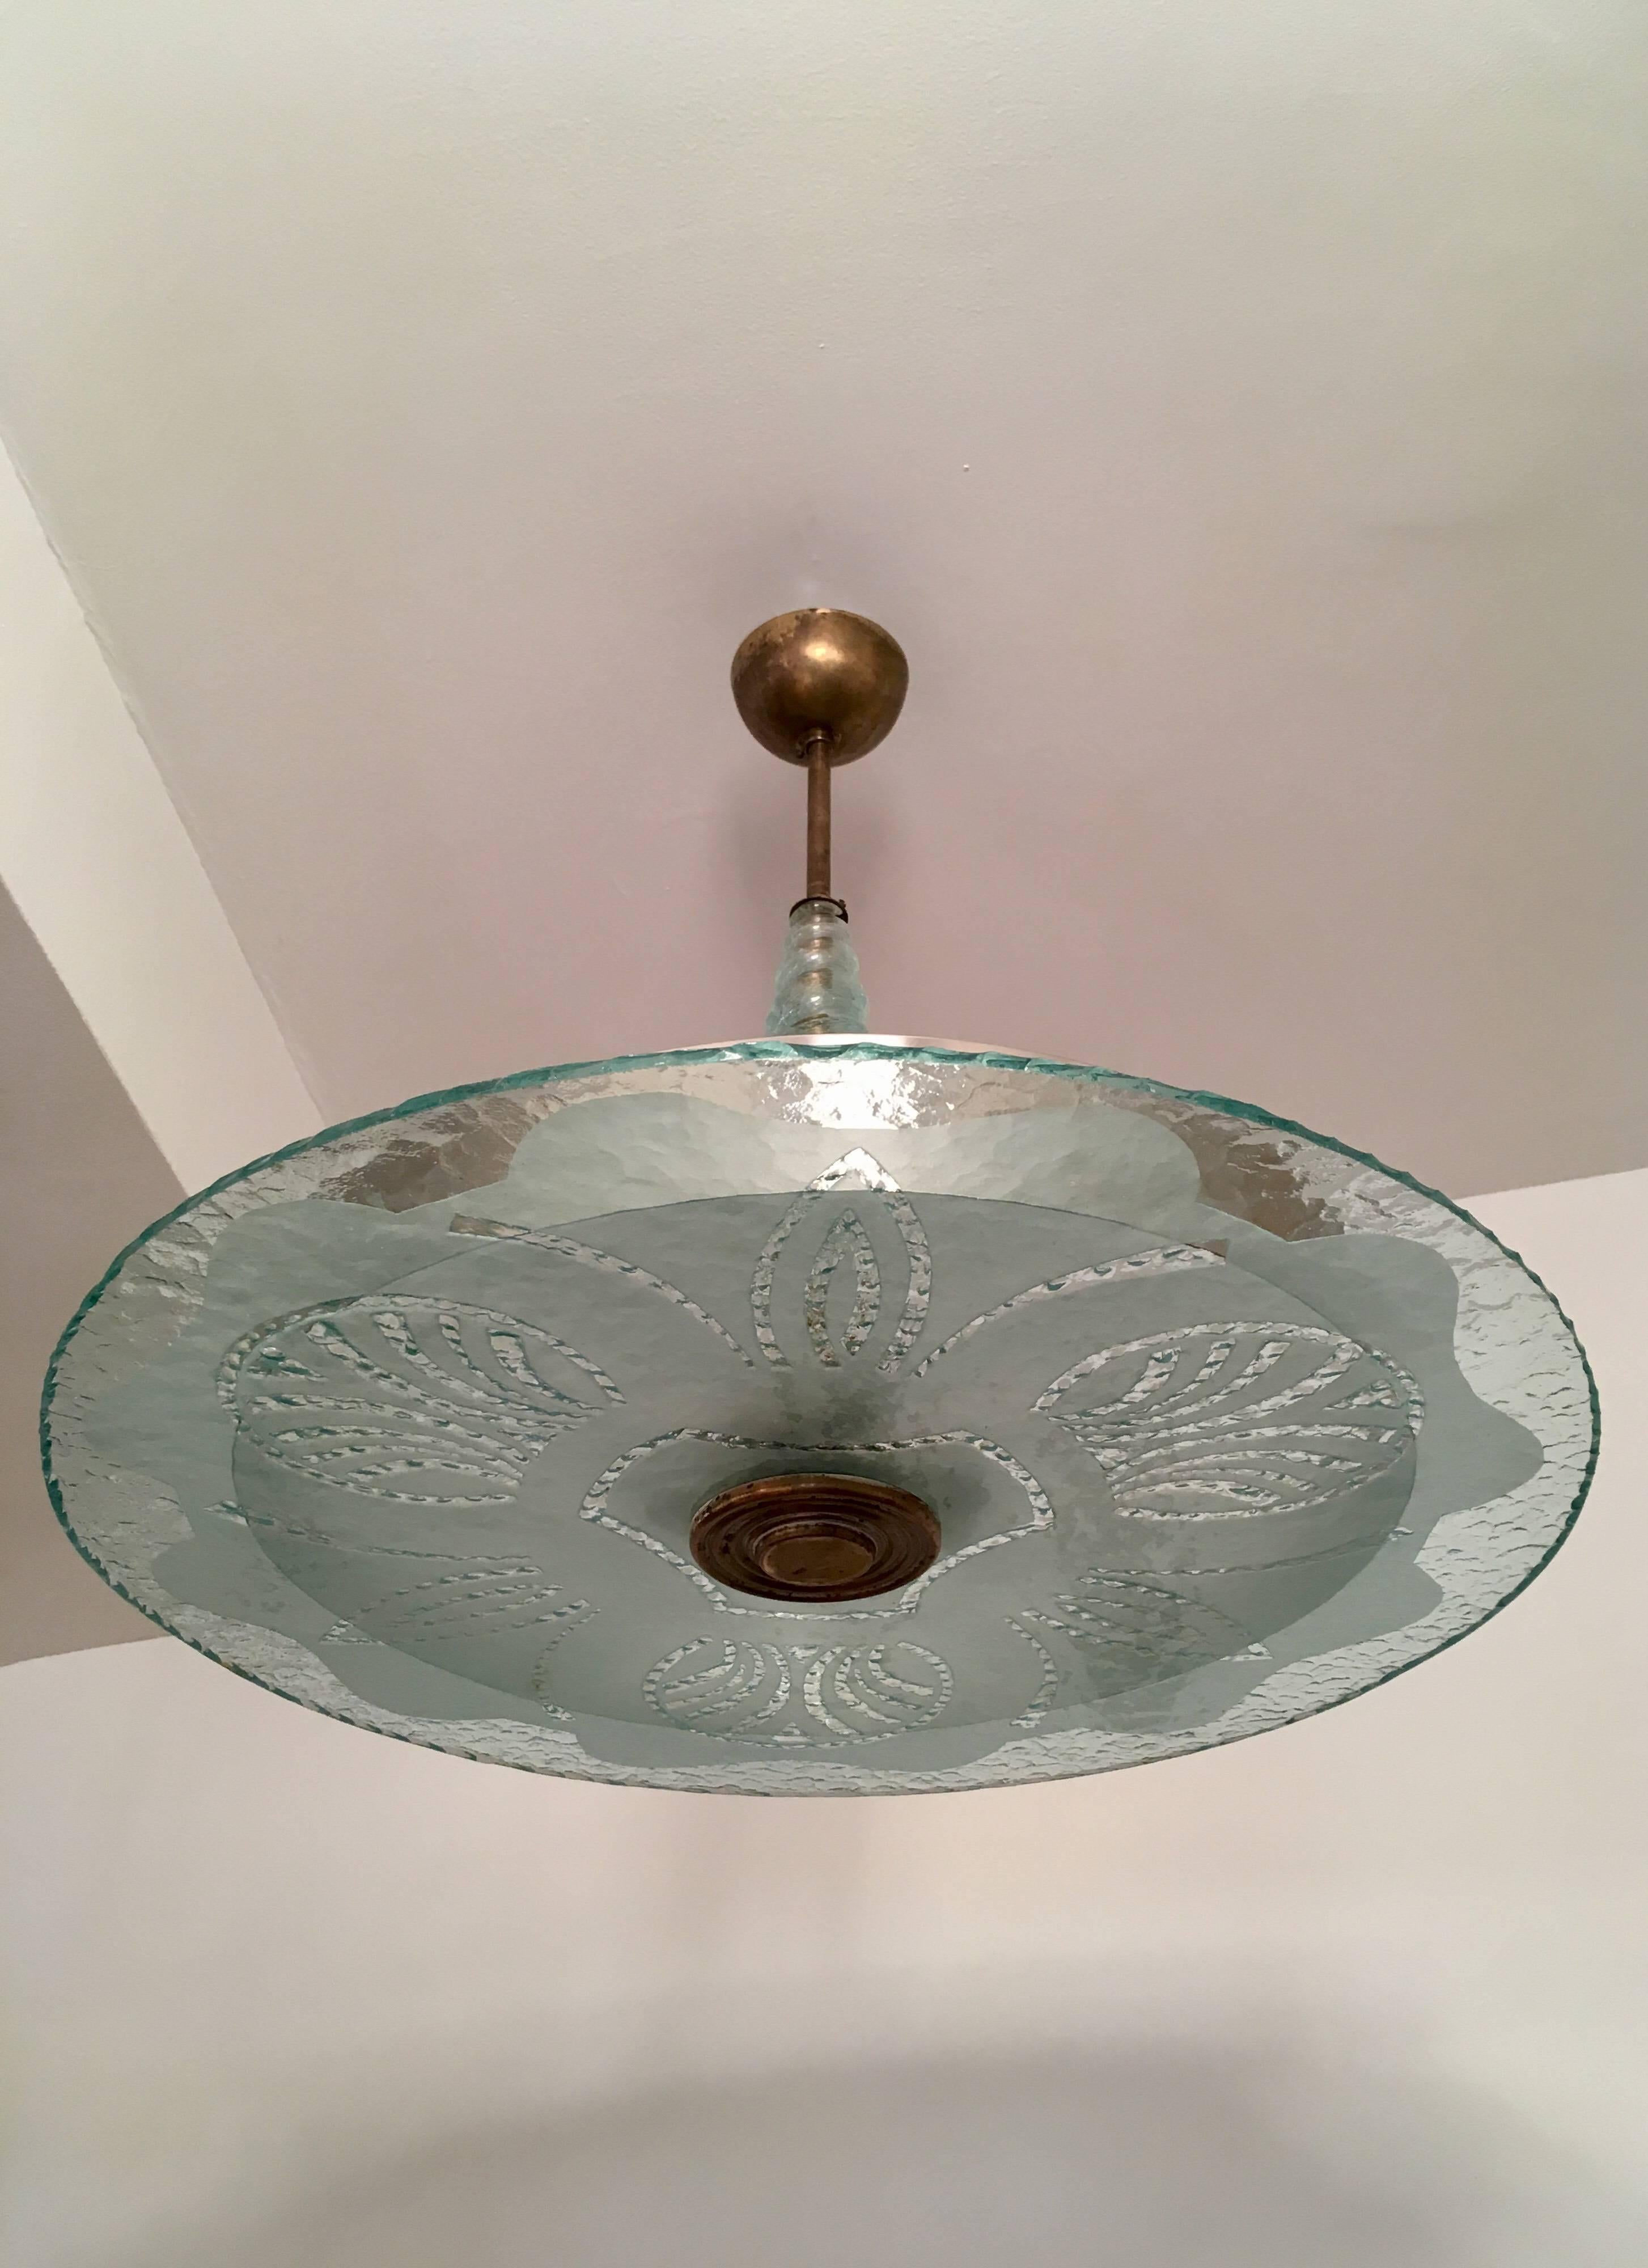 A wonderful 1940s Swedish decorative etched glass, aged brass and nickel trim light pendant by Glossner. Three light sources. Newly rewired.